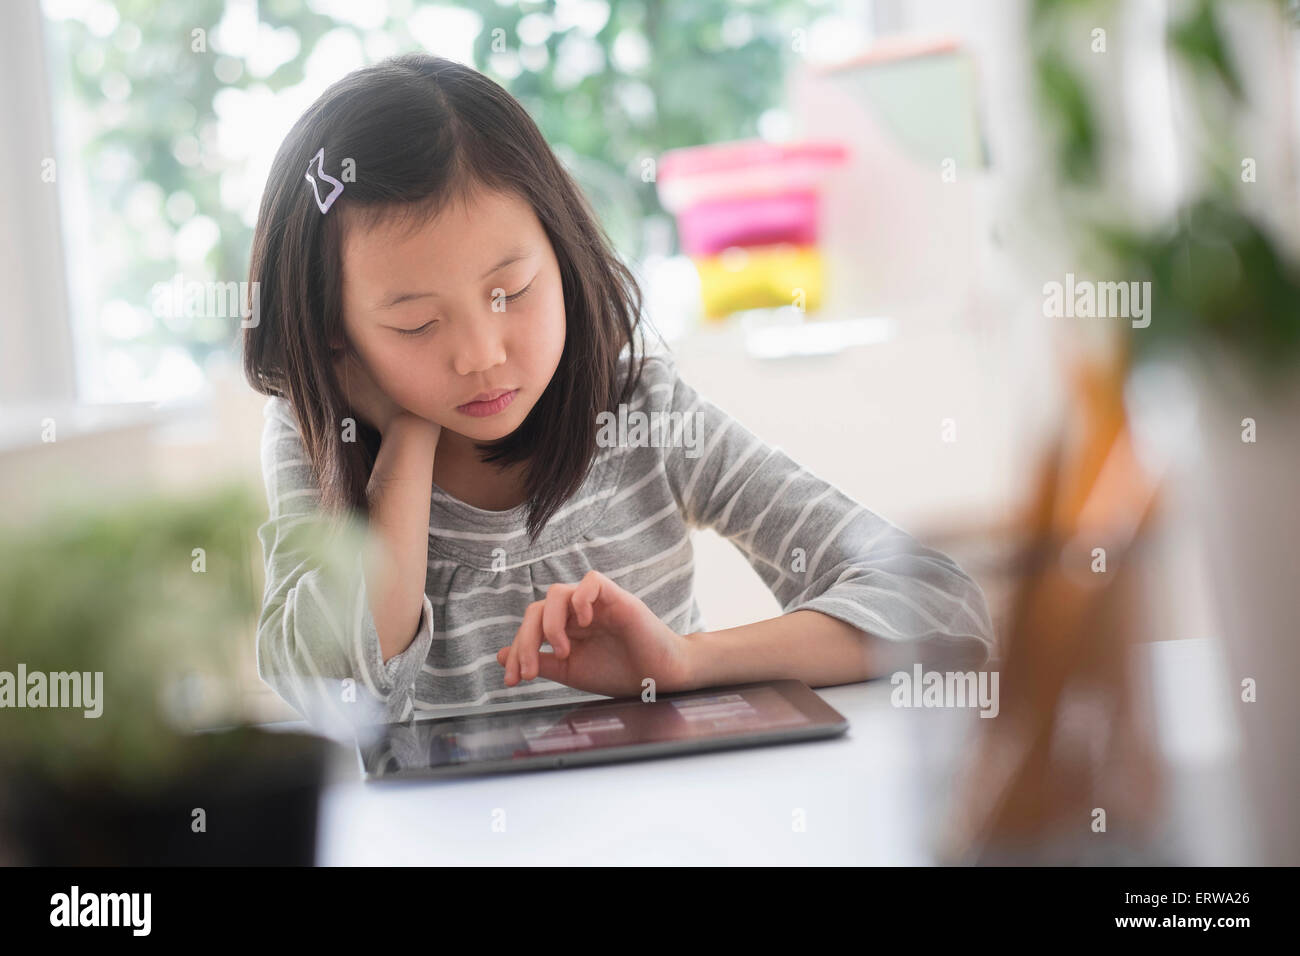 Chinese student using digital tablet Stock Photo